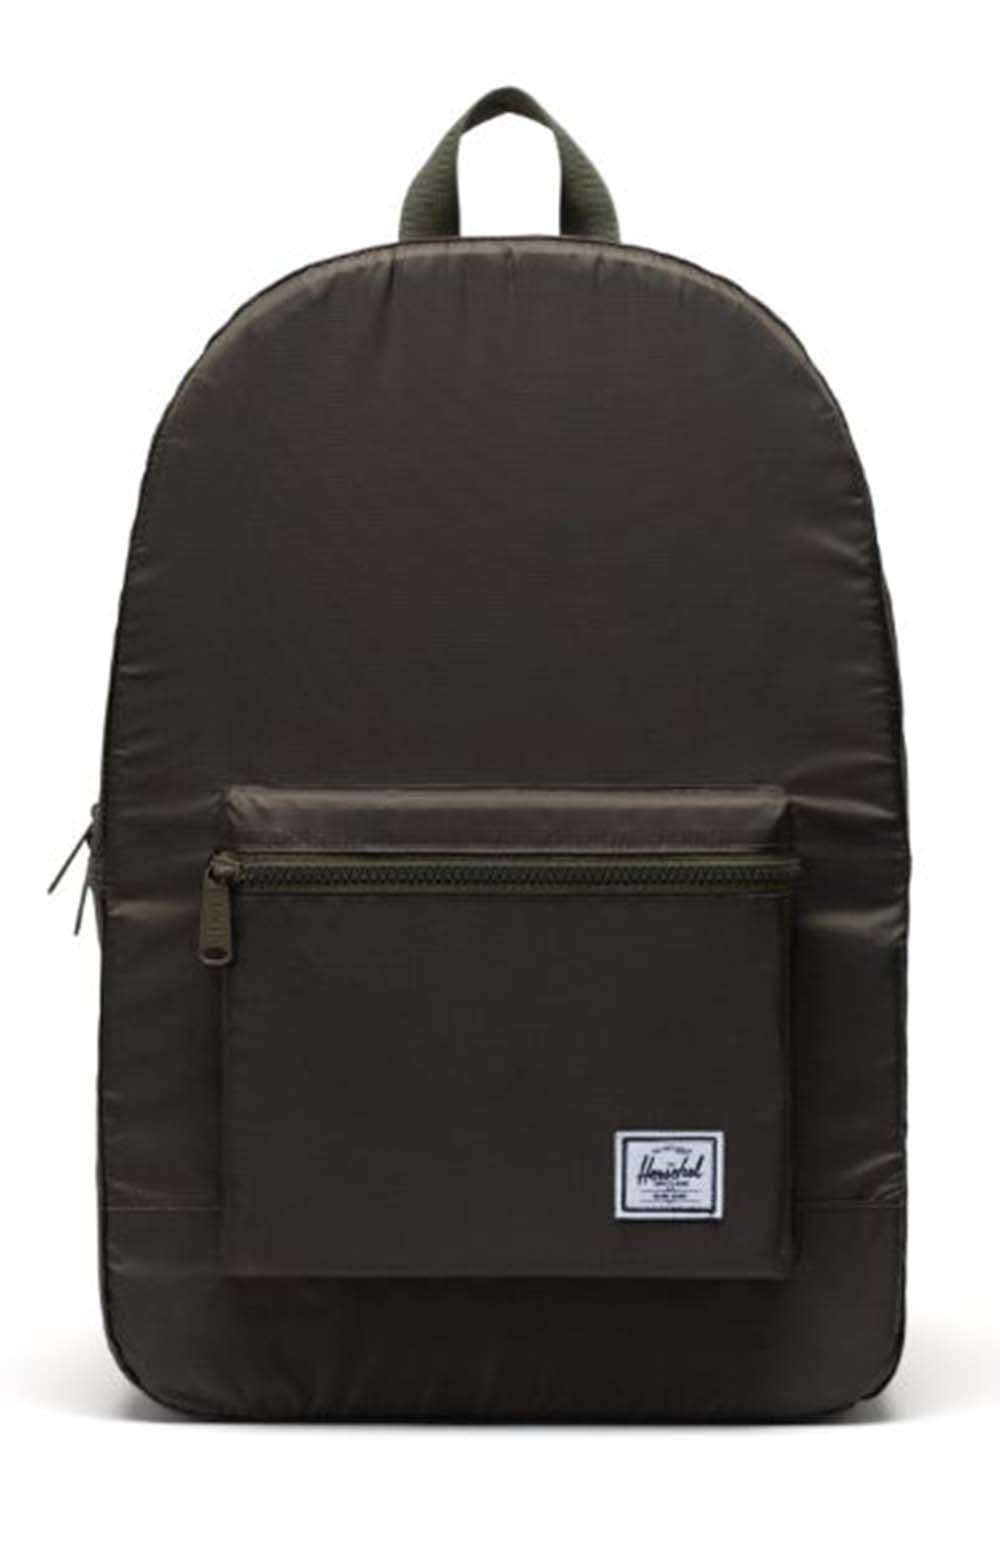 Packable Daypack - Ivy Green